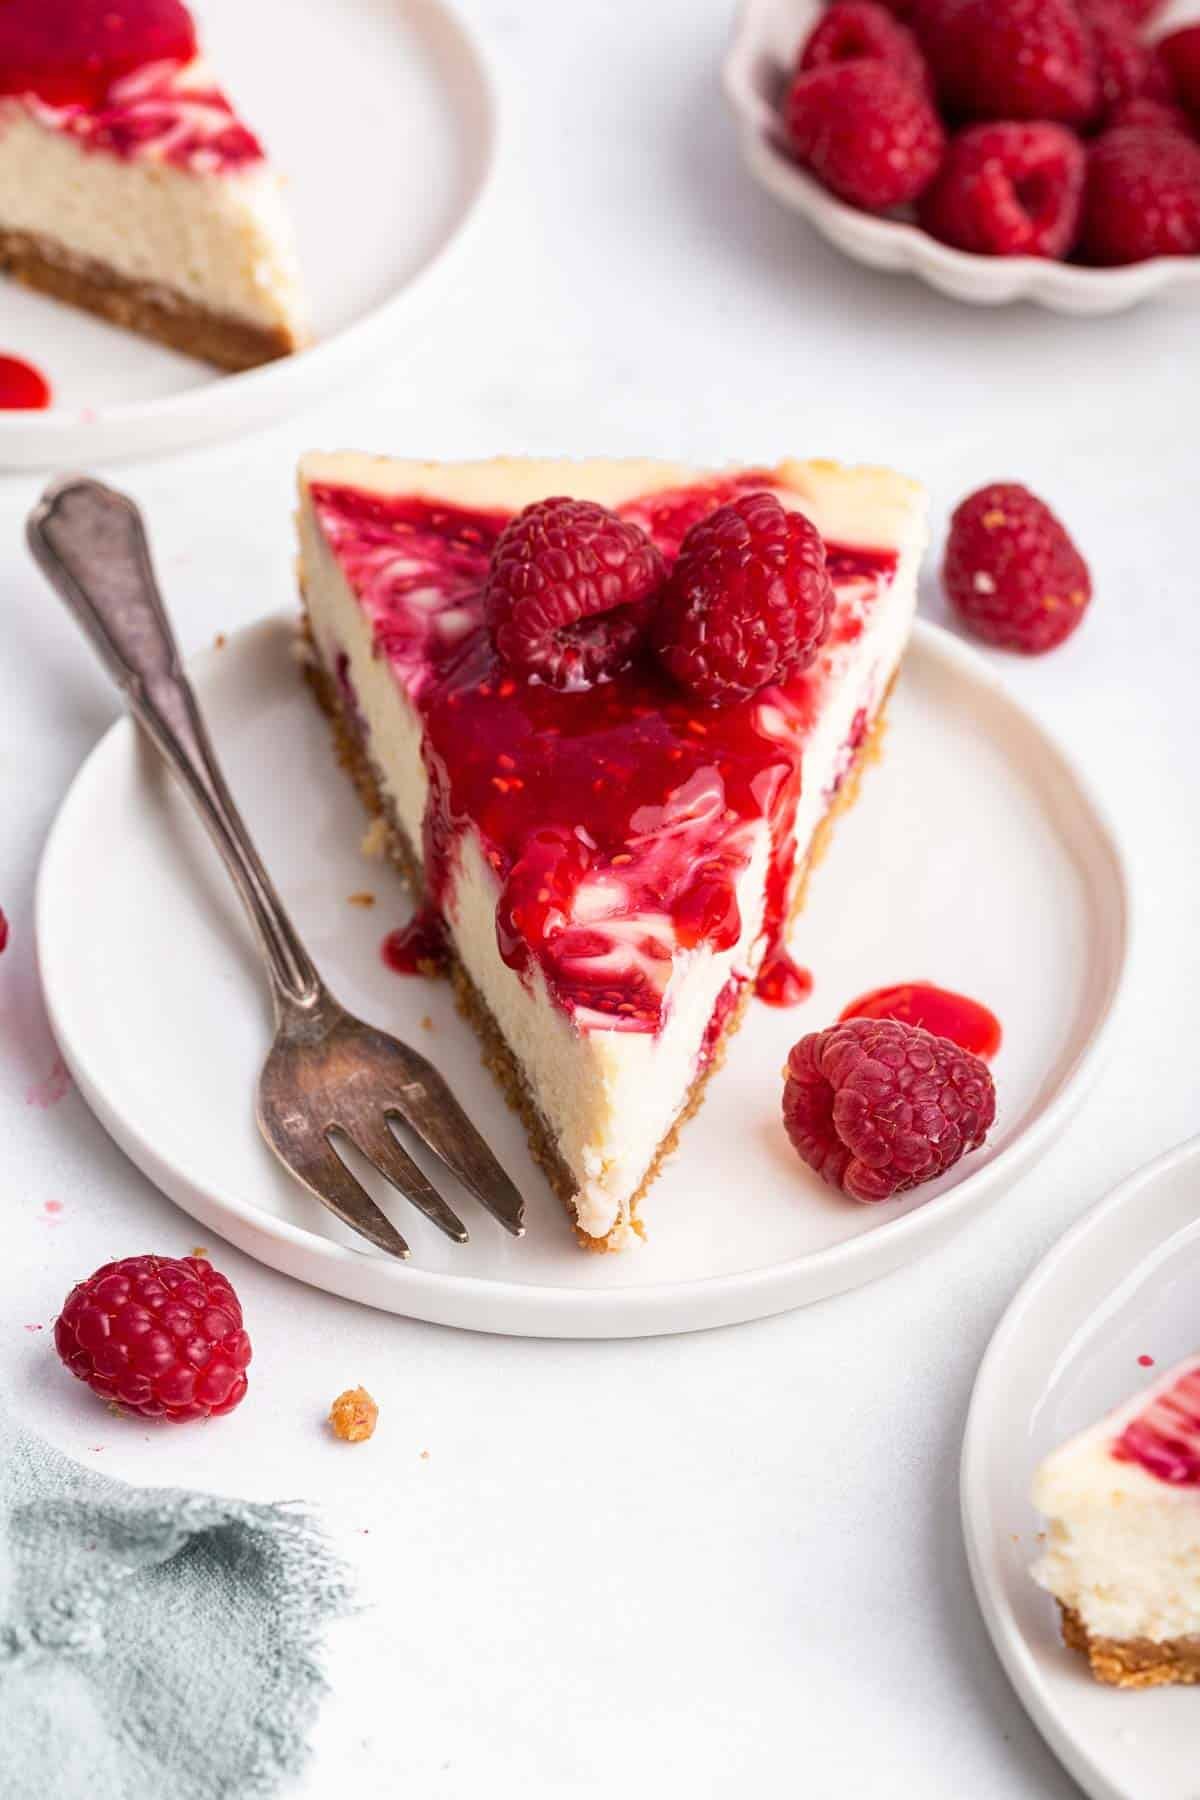 Slice of white chocolate raspberry cheesecake on plate with fork on side.